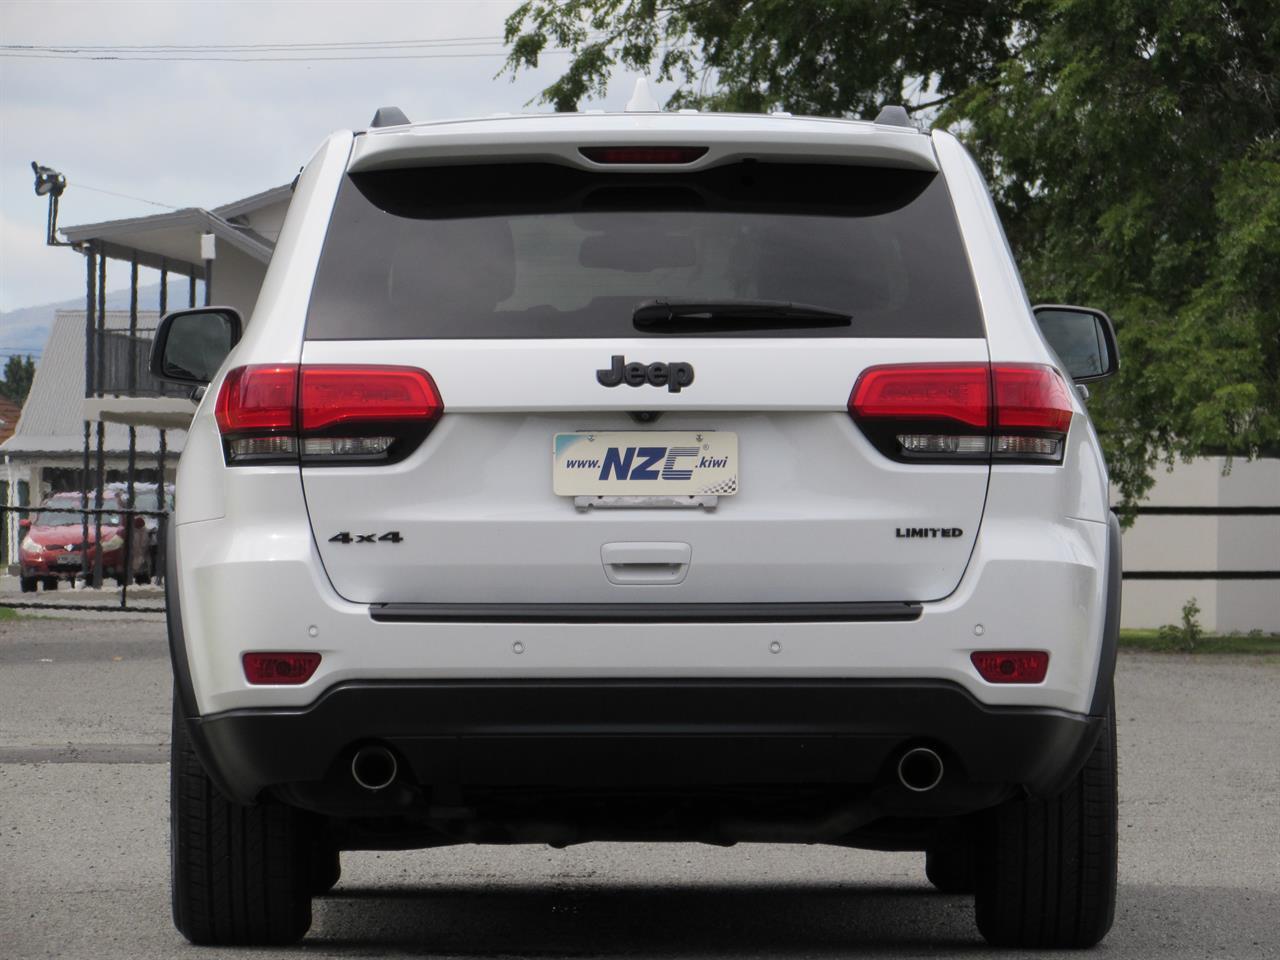 2013 Jeep Grand Cherokee only $147 weekly